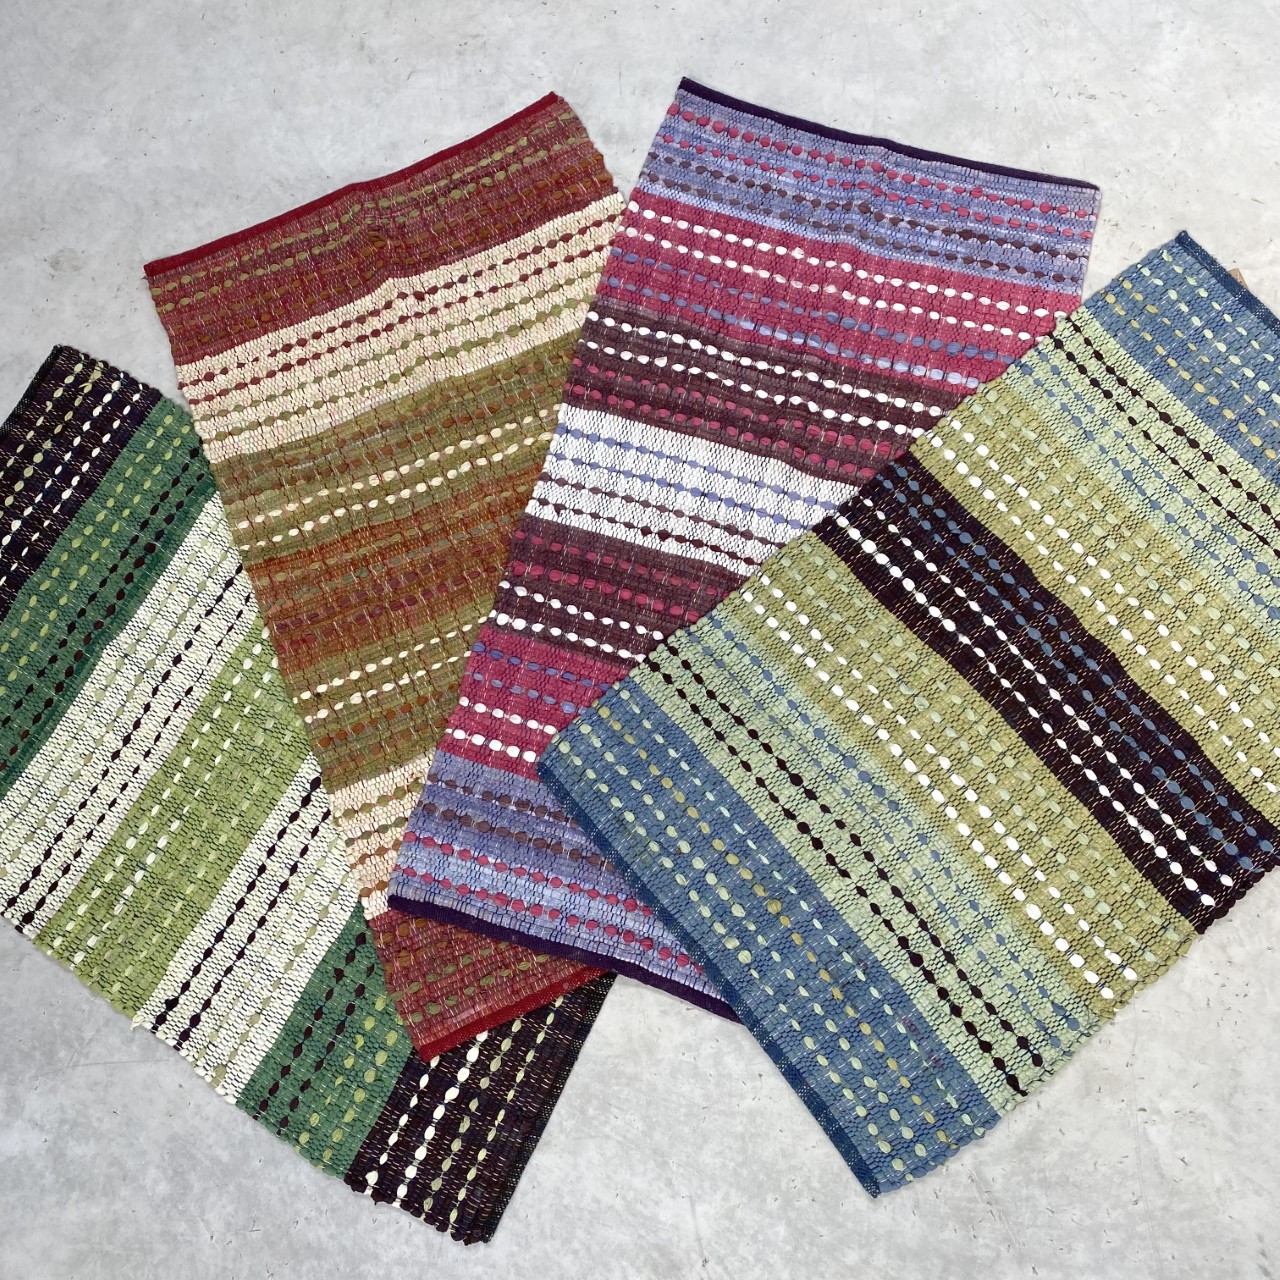 Rectangle shaped bright textured multi-coloured recycled cotton chindi rugs 2 sizes